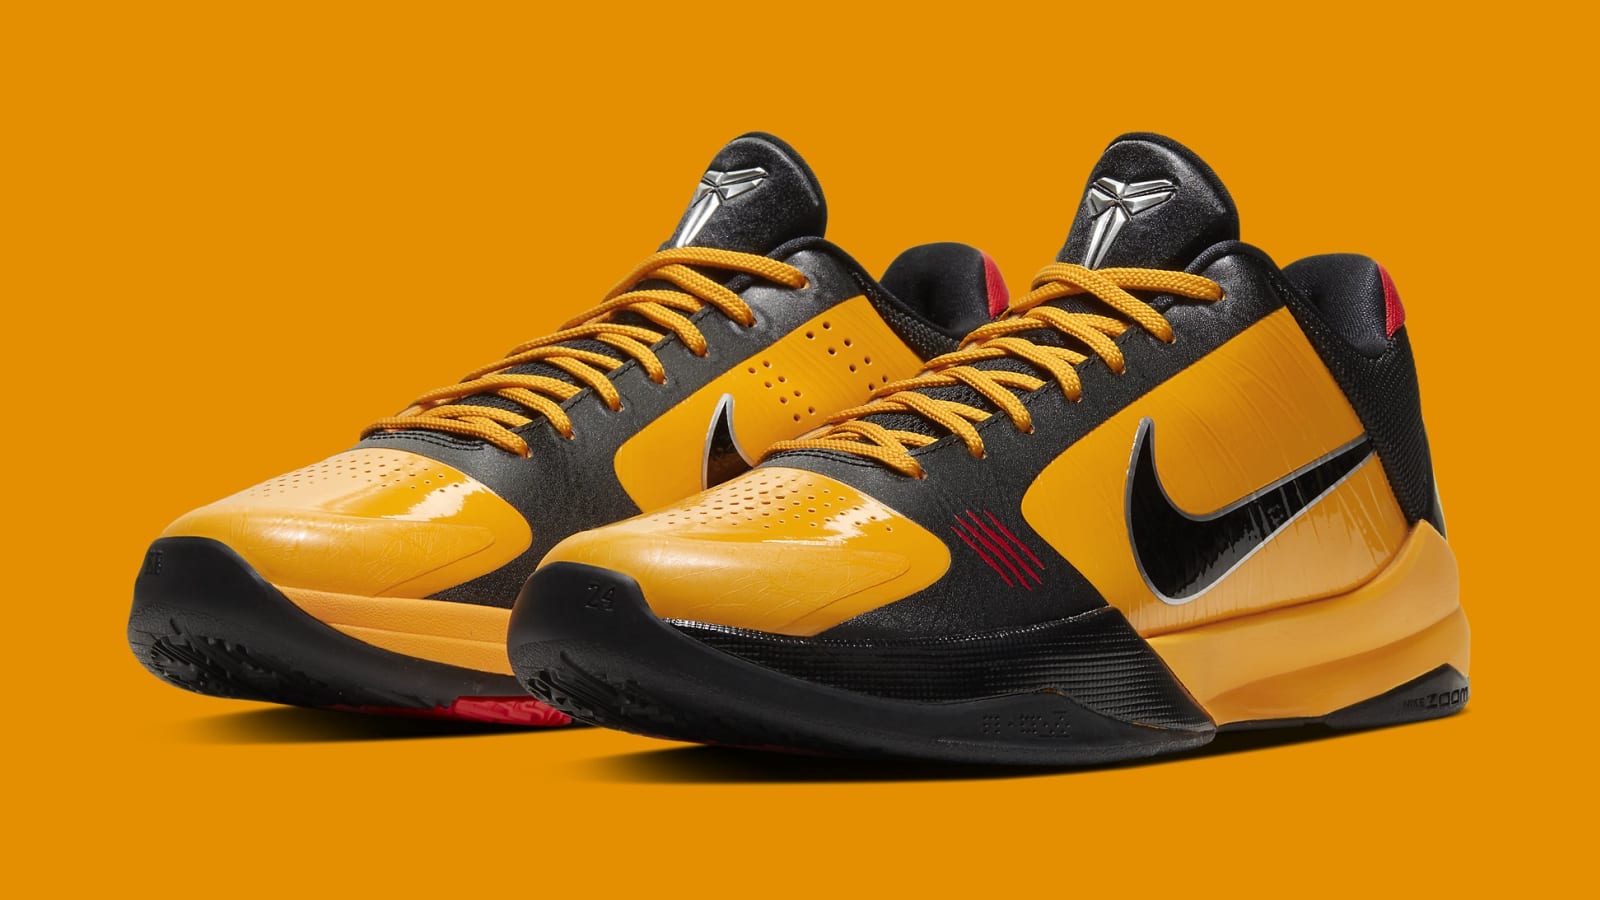 Nike Kobe 5 Protro Dropping In Two &quot;Bruce Lee&quot; Colorways: Photos